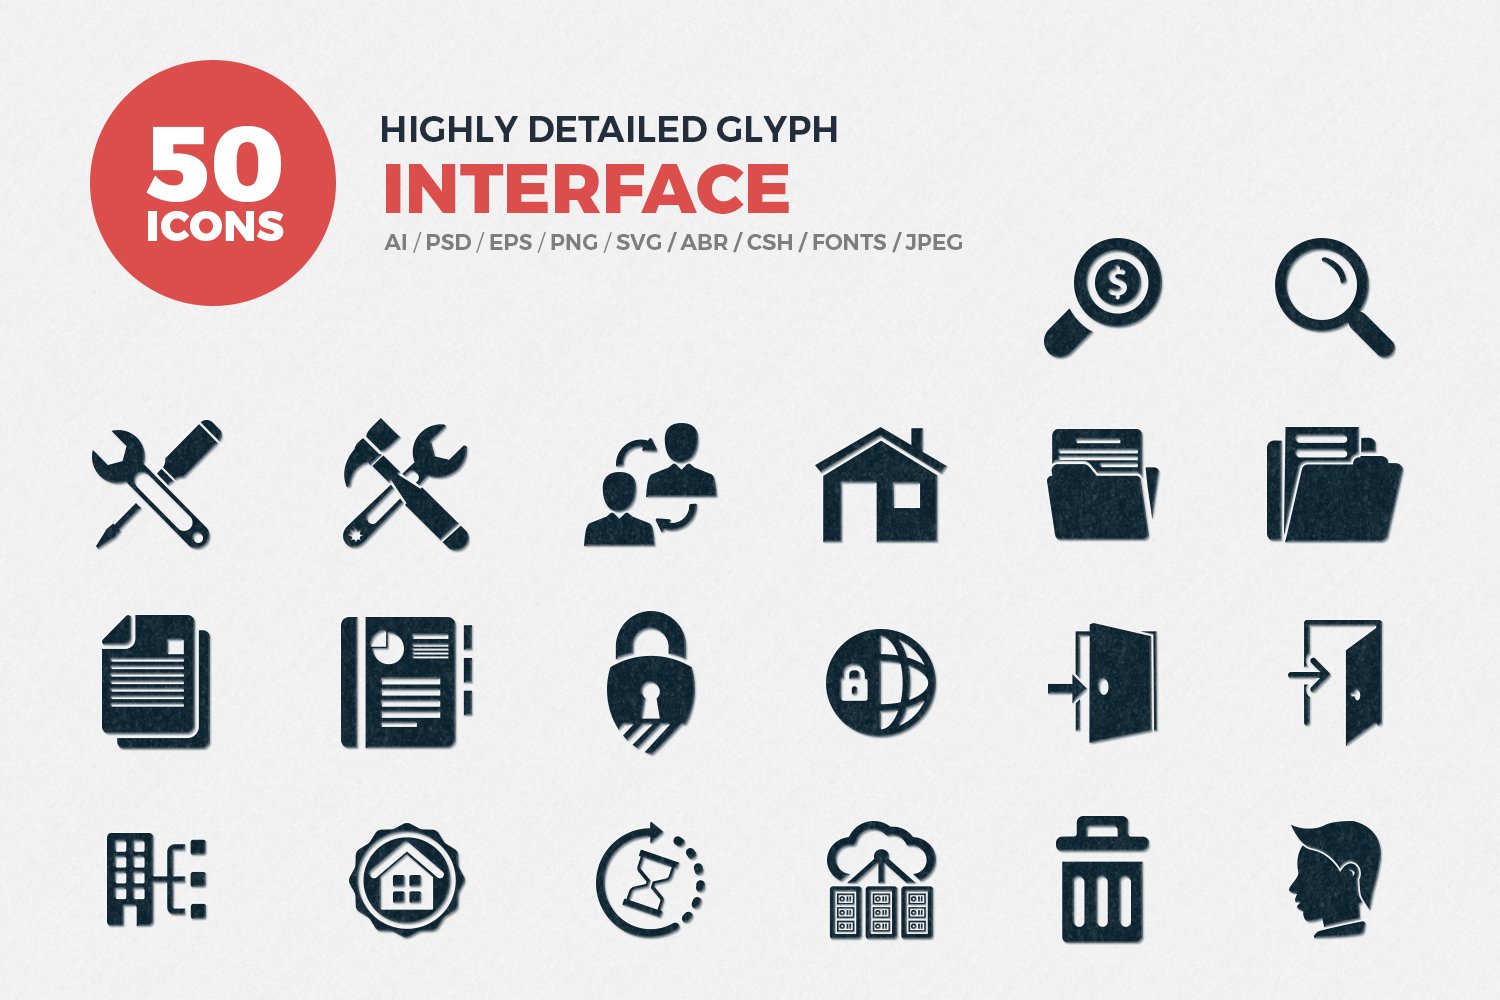 Glyph Icons Interface Set cover image.